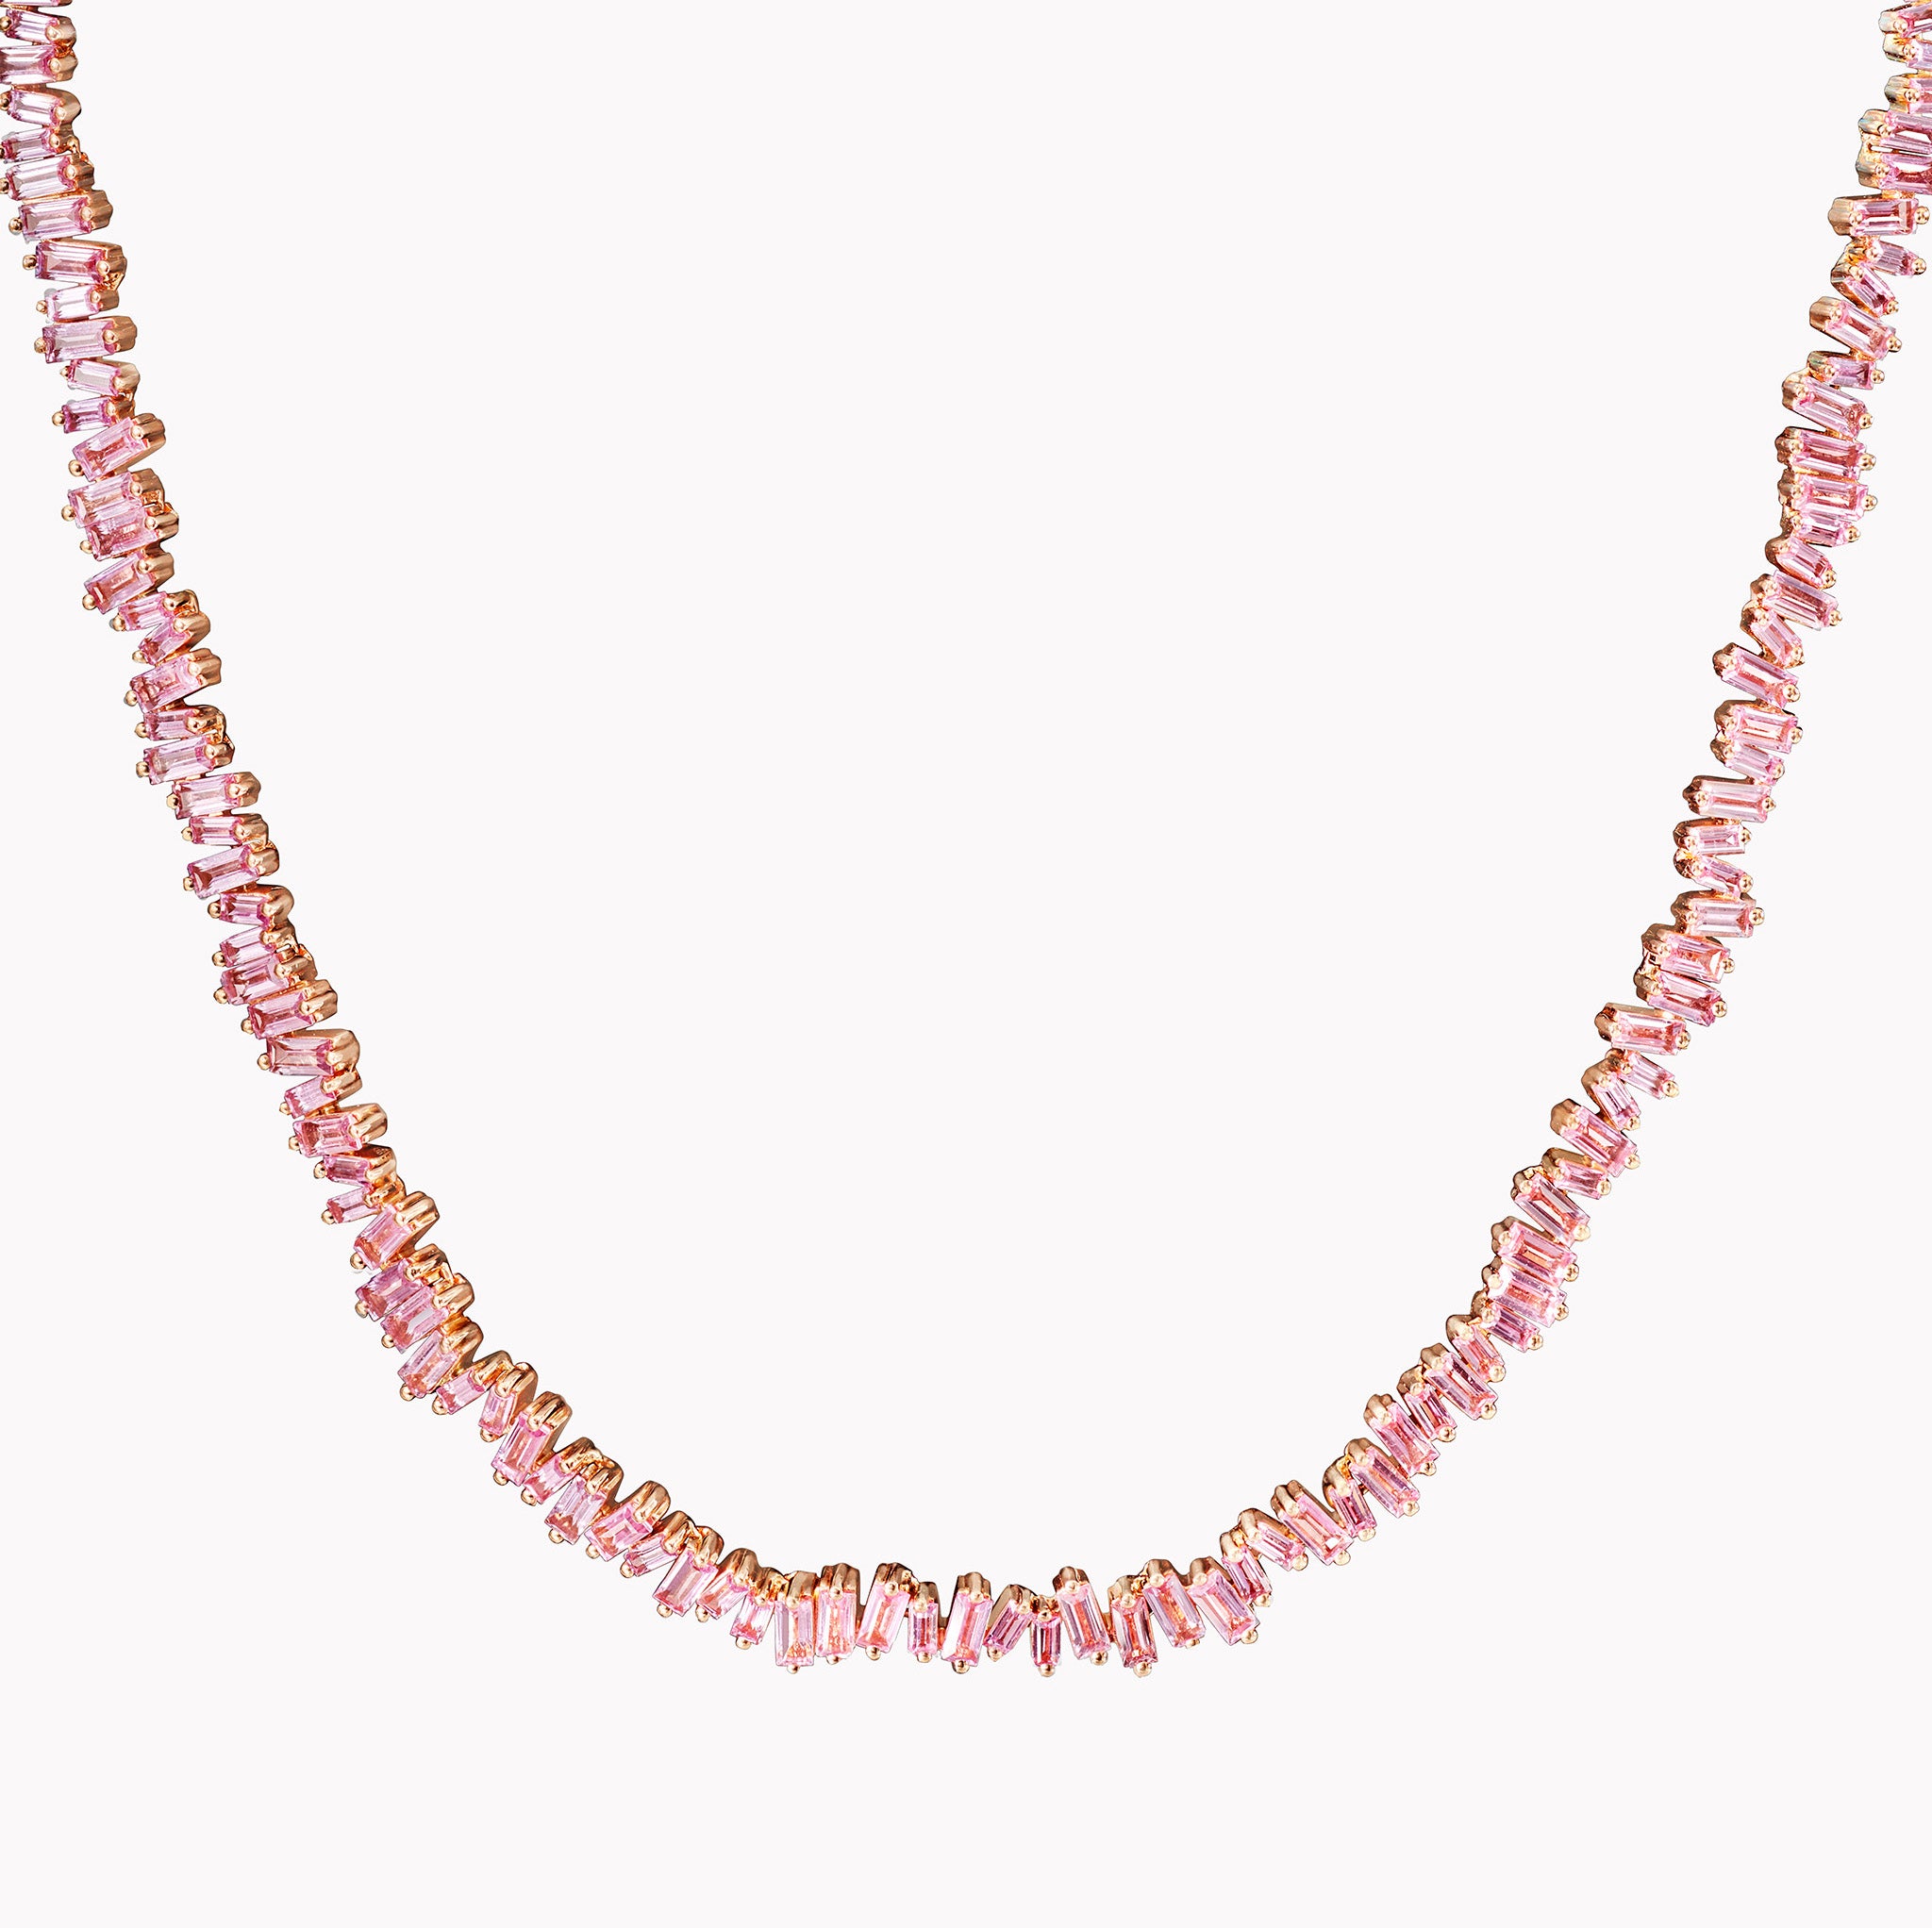 Delicate Pink Sapphire Necklace with Gold drop